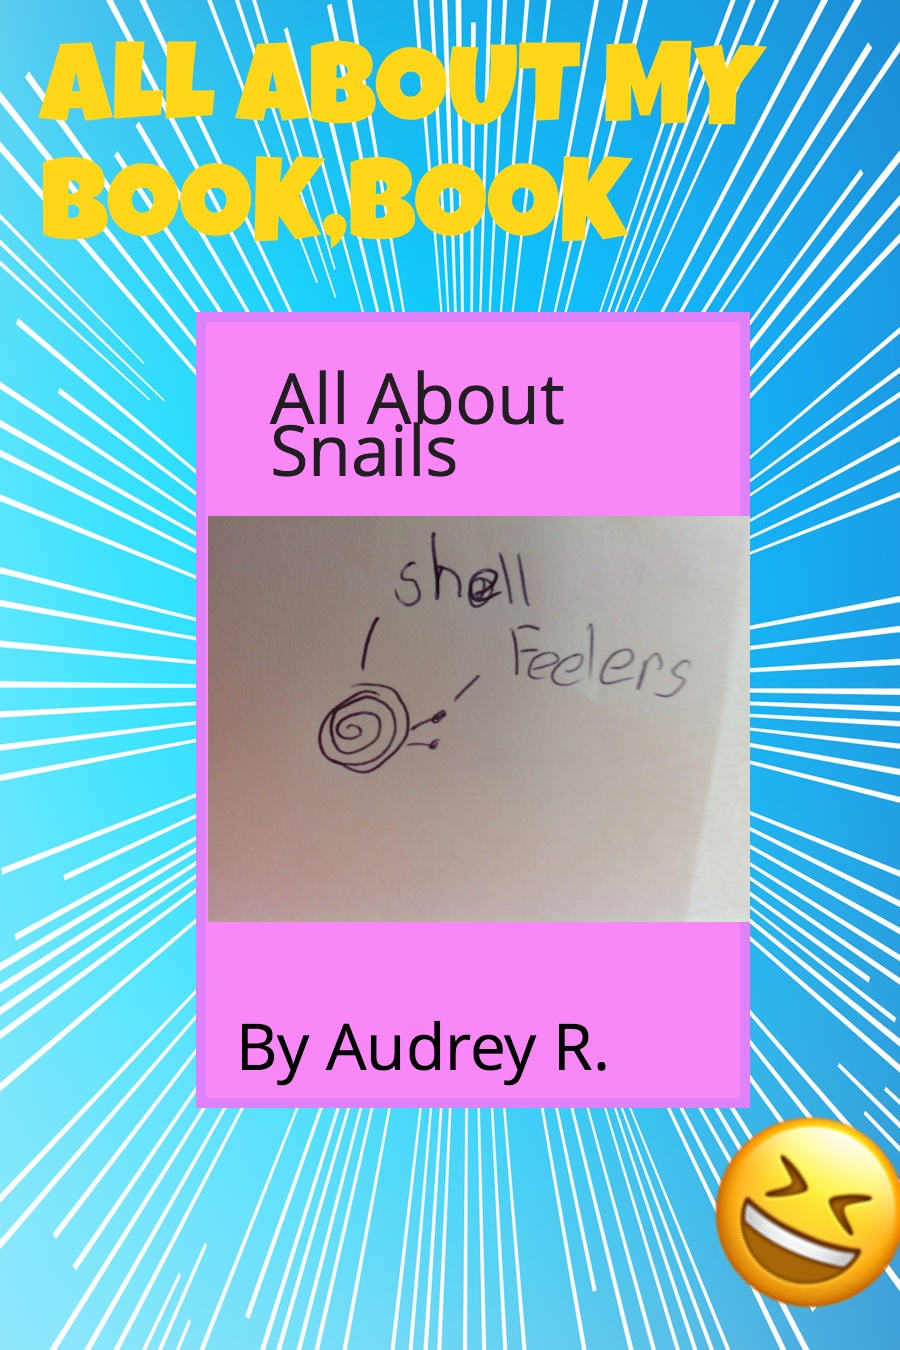 All About All About Snails by Audrey R